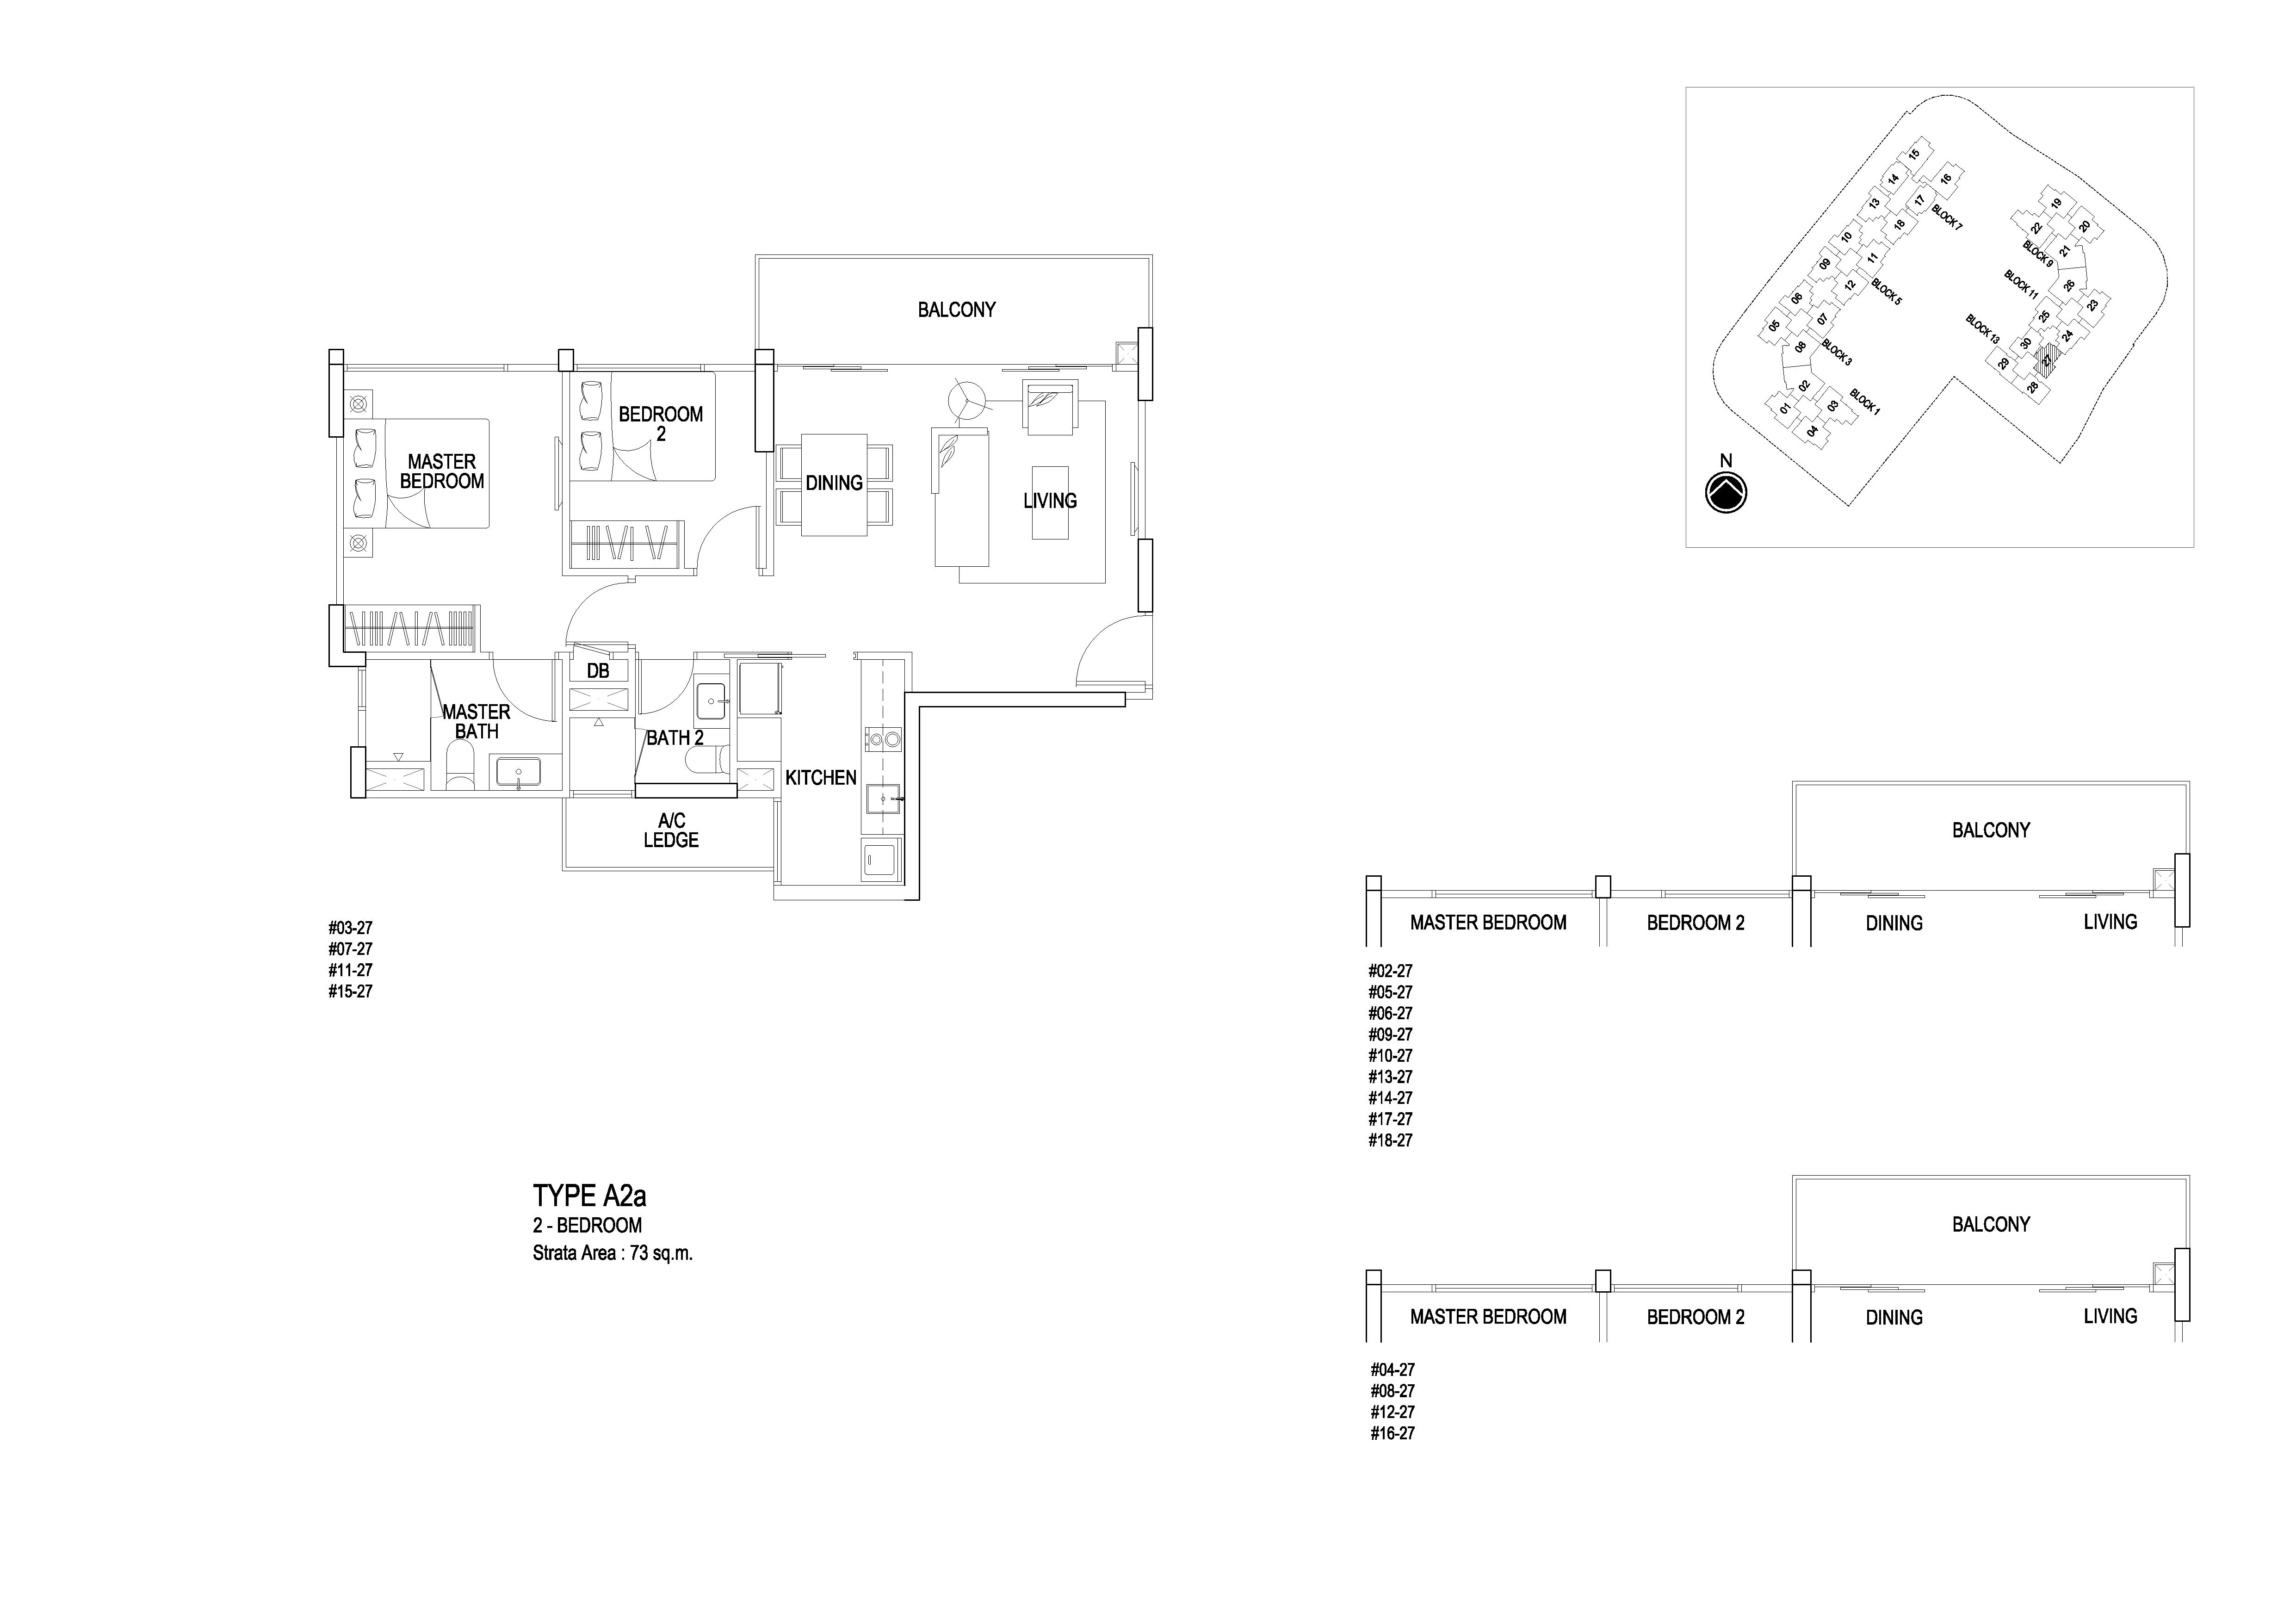 Flo Residence 2 Bedroom Floor Plans Type A2a